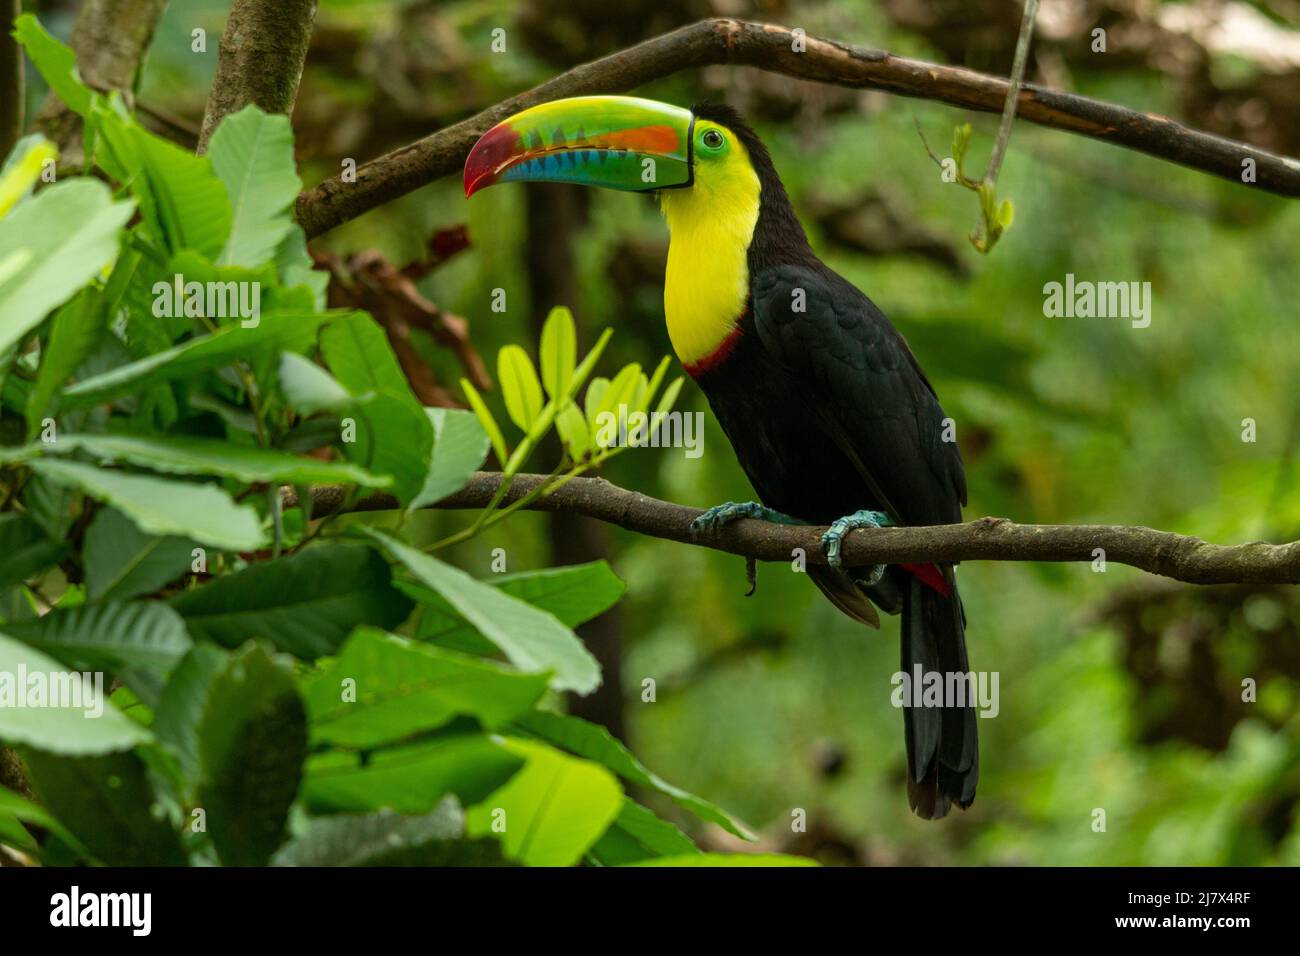 Keel-billed Toucan (Ramphastos sulfuratus) perching on branch, Colombia- stock photo Stock Photo